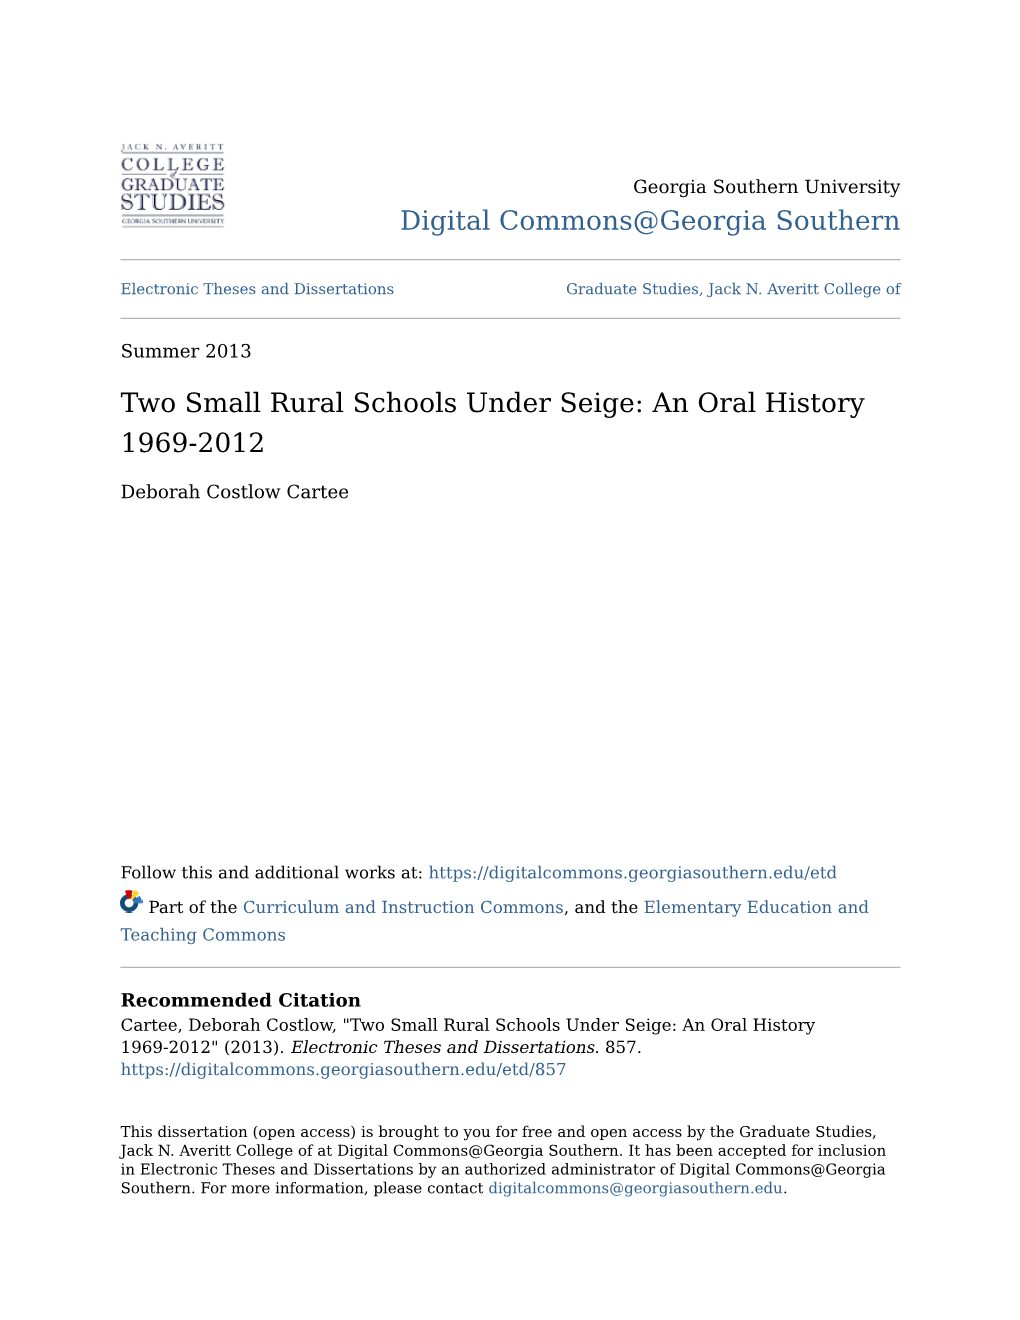 Two Small Rural Schools Under Seige: an Oral History 1969-2012